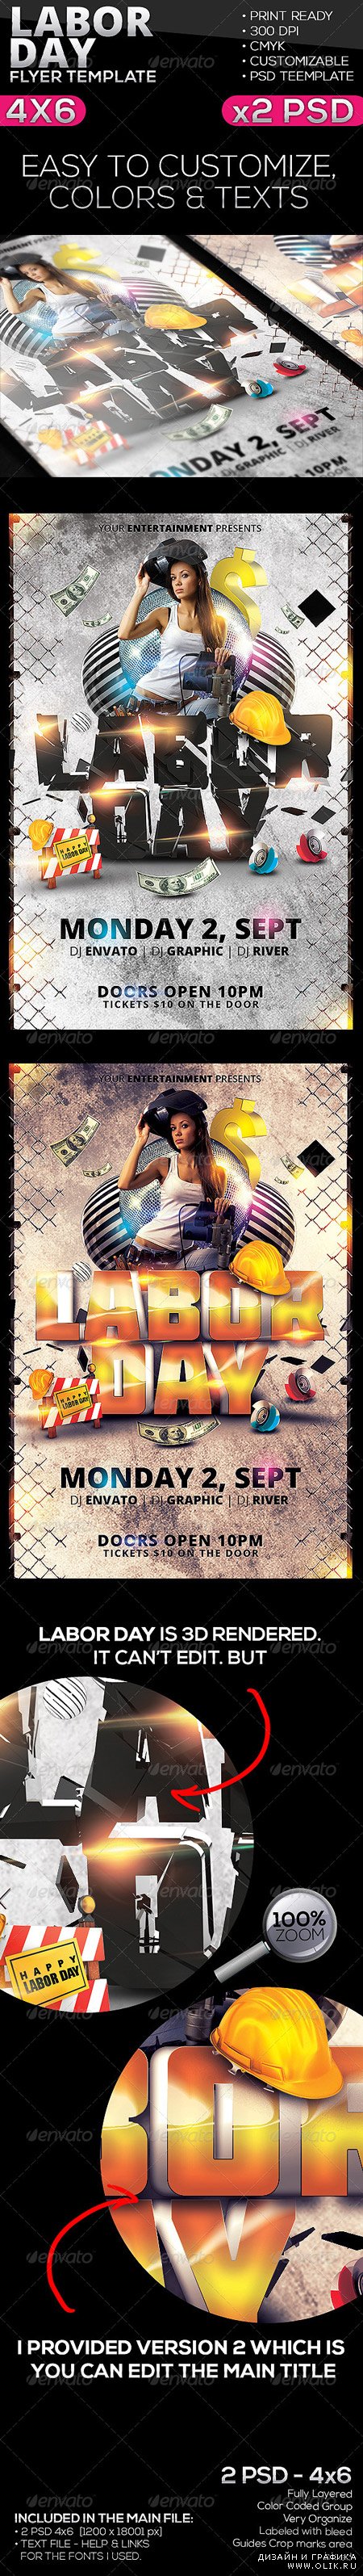 PSD - Labor Day Flyer Template 5415310